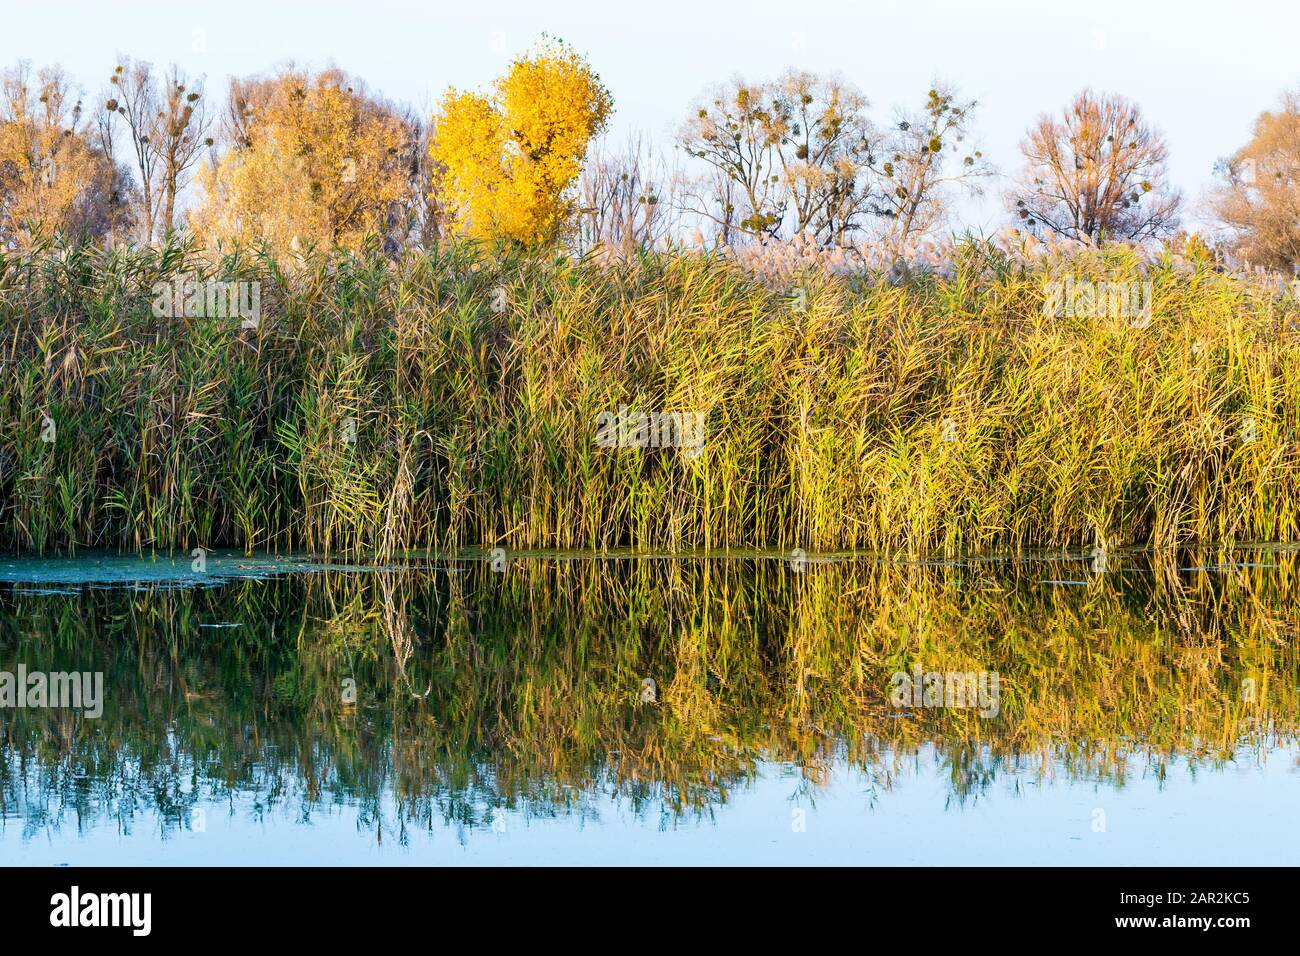 Landscape with river plants and water reflection Stock Photo